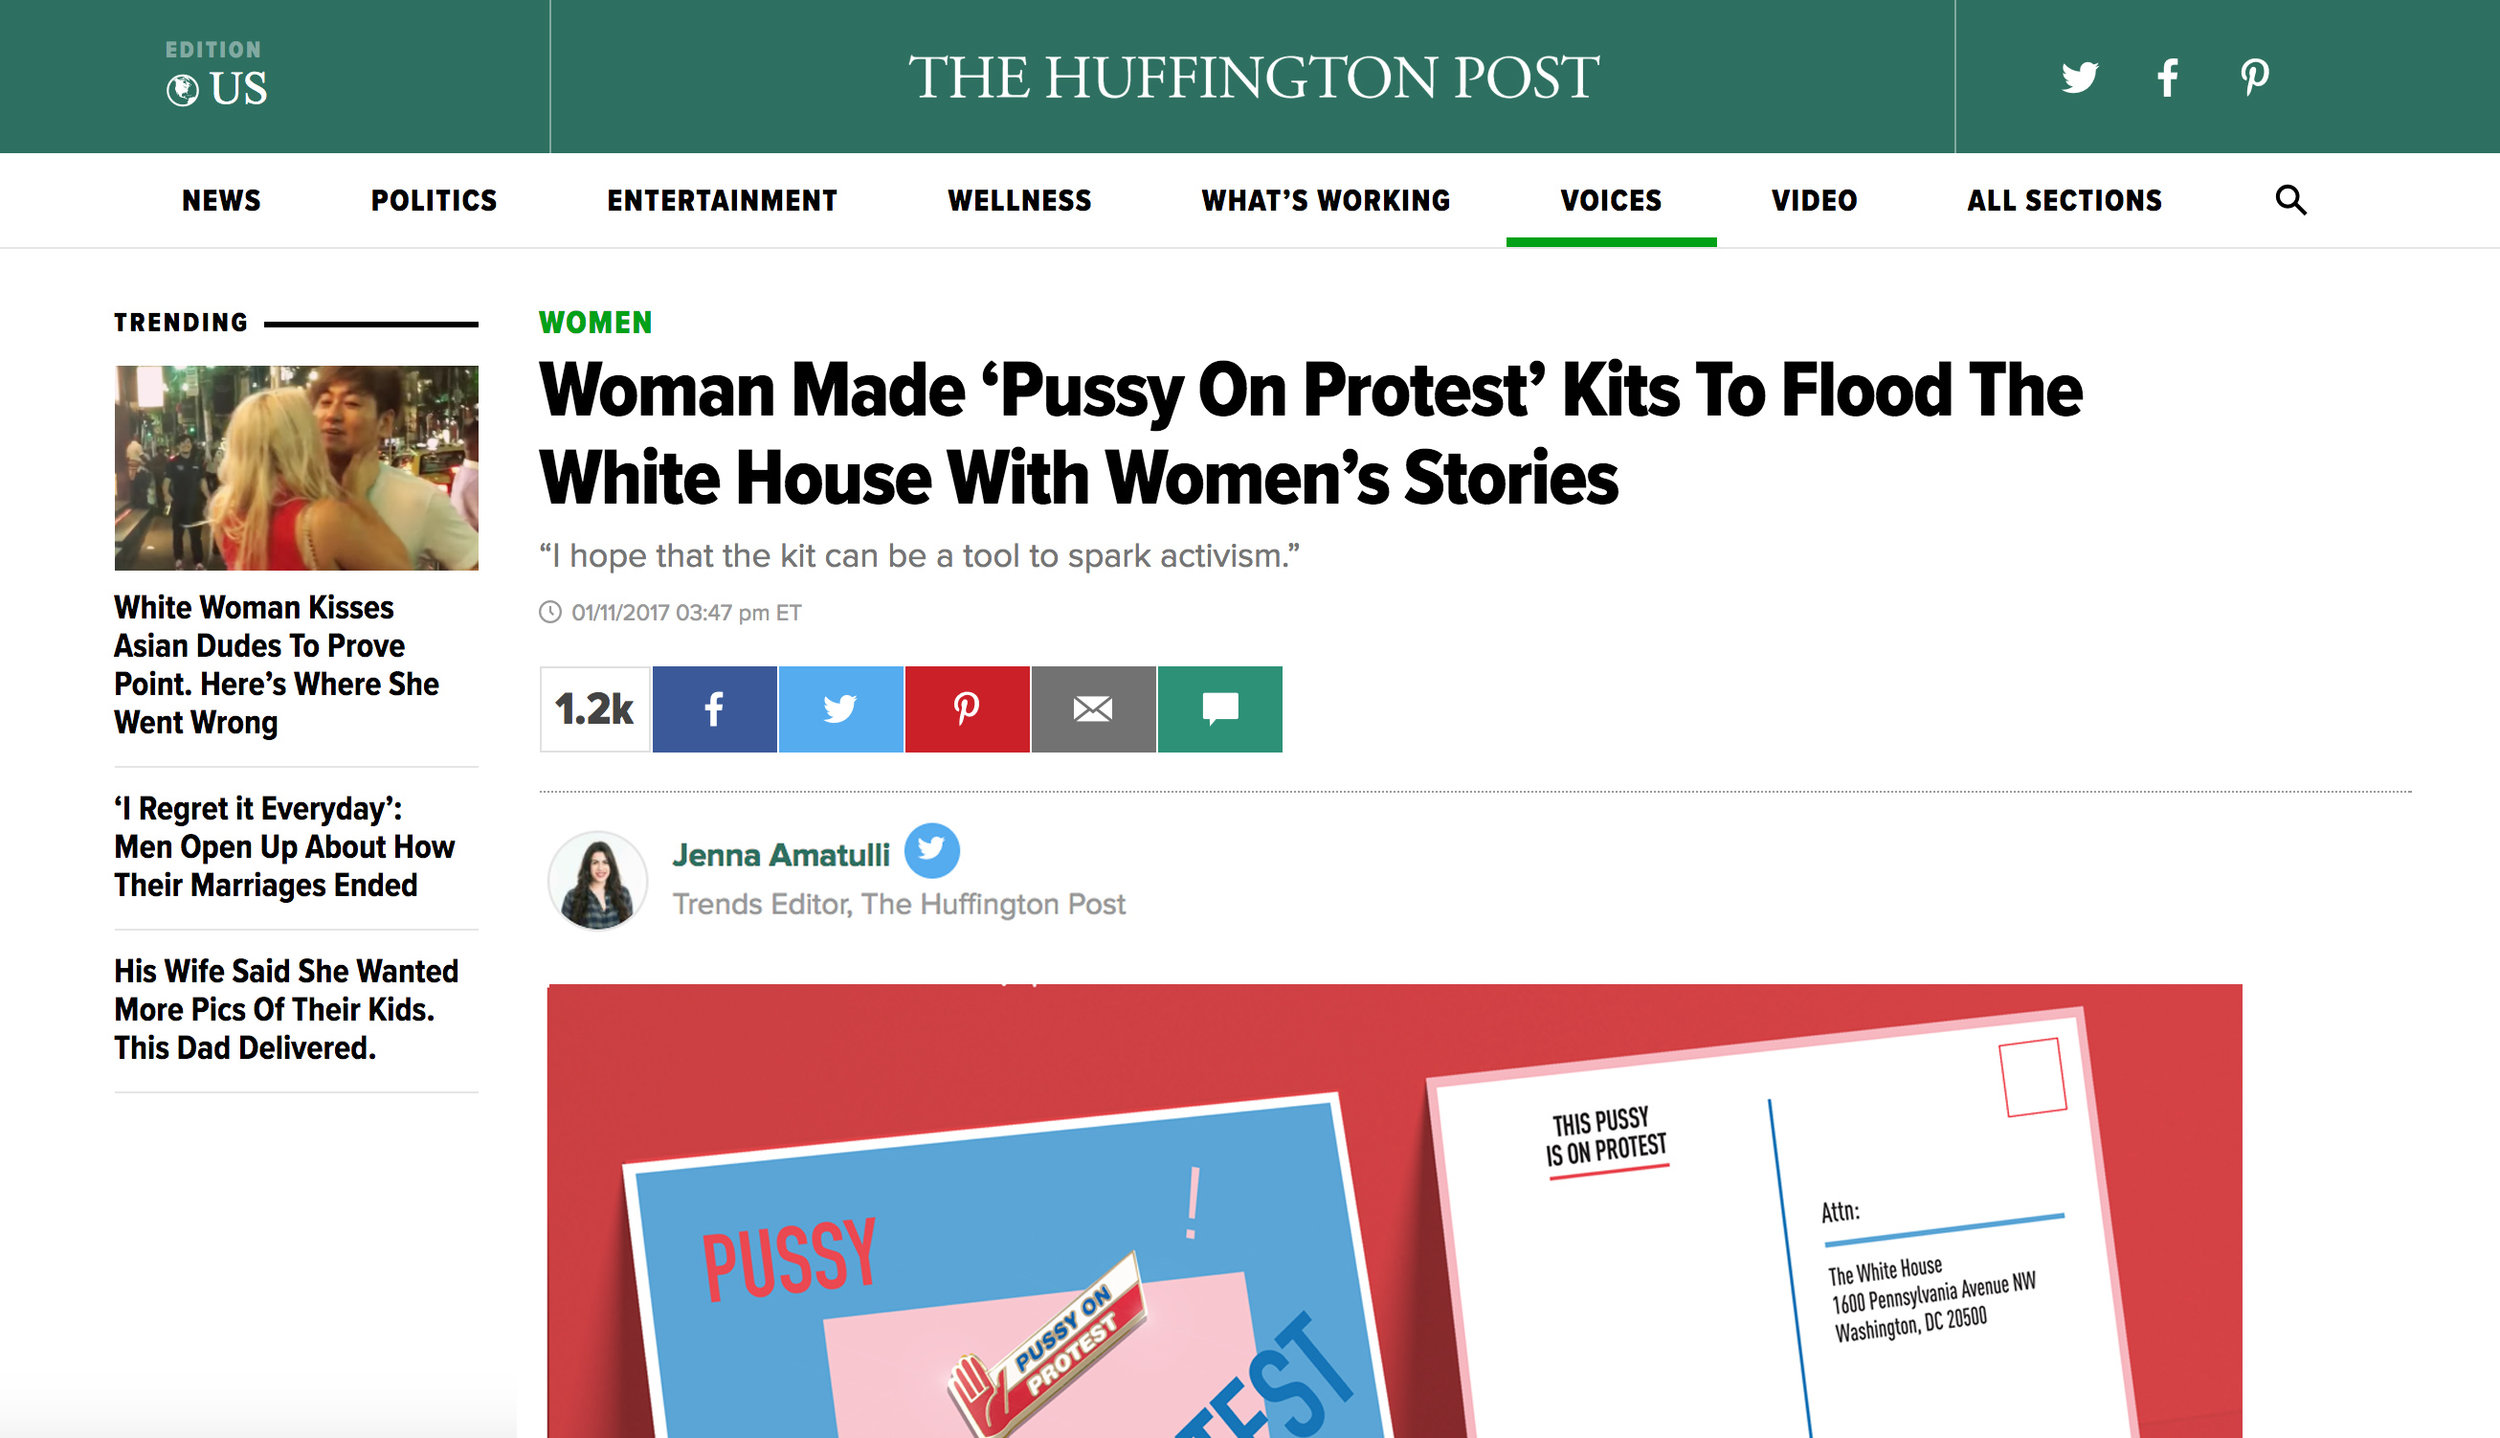 HUFFINGTON POST FRONT PAGE.jpg